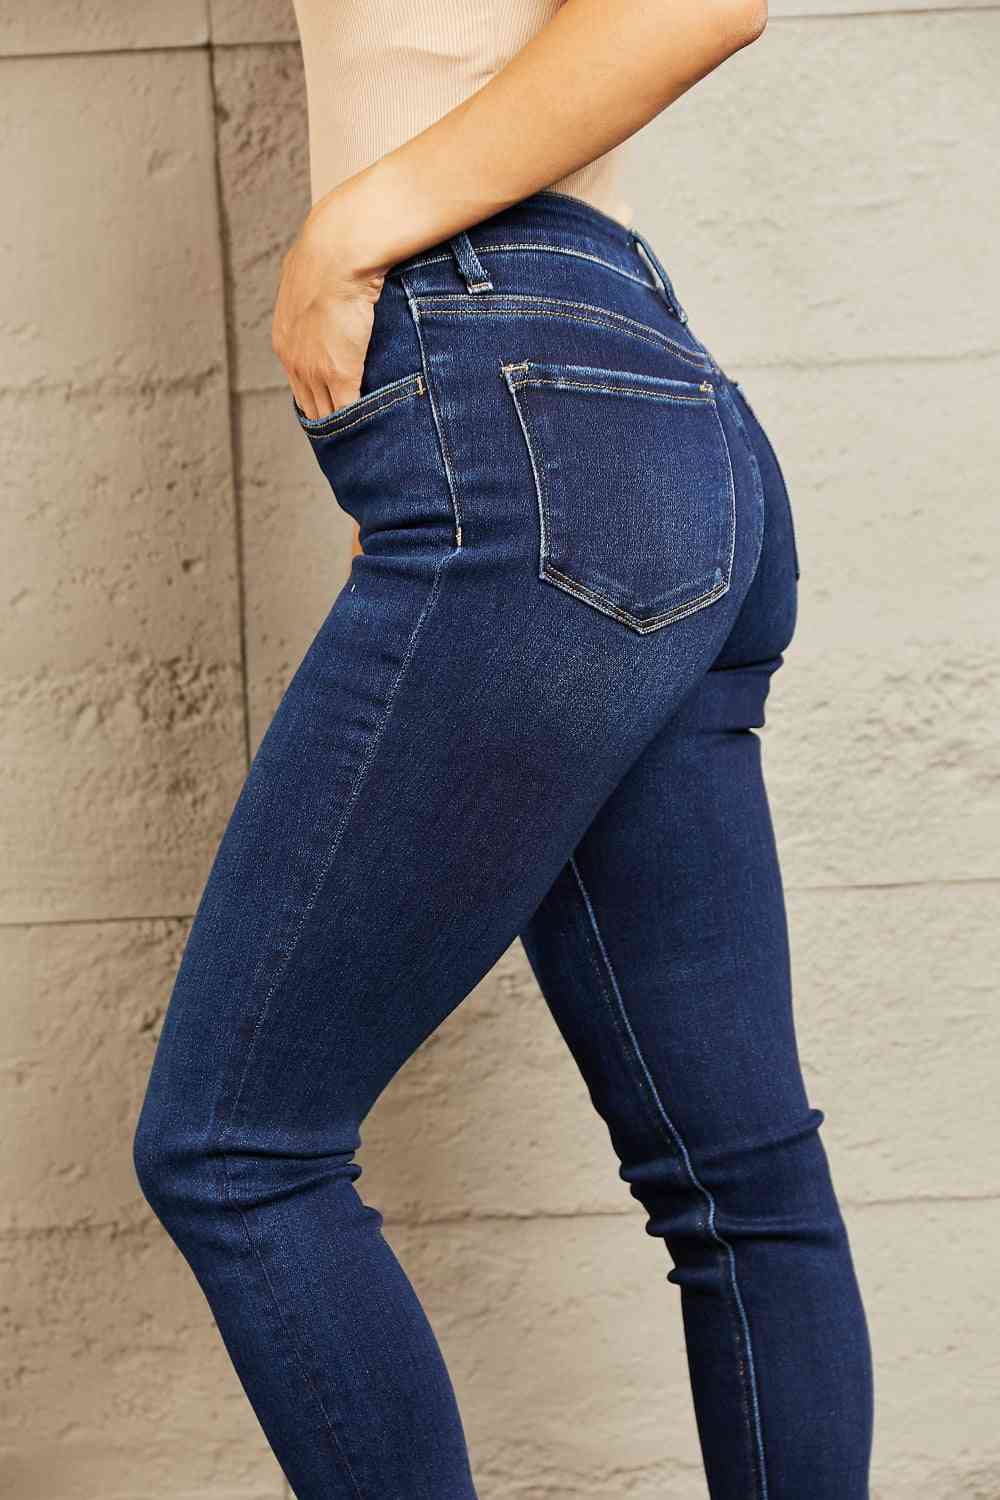 Tan BAYEAS Mid Rise Slim Jeans Sentient Beauty Fashions Apparel & Accessories